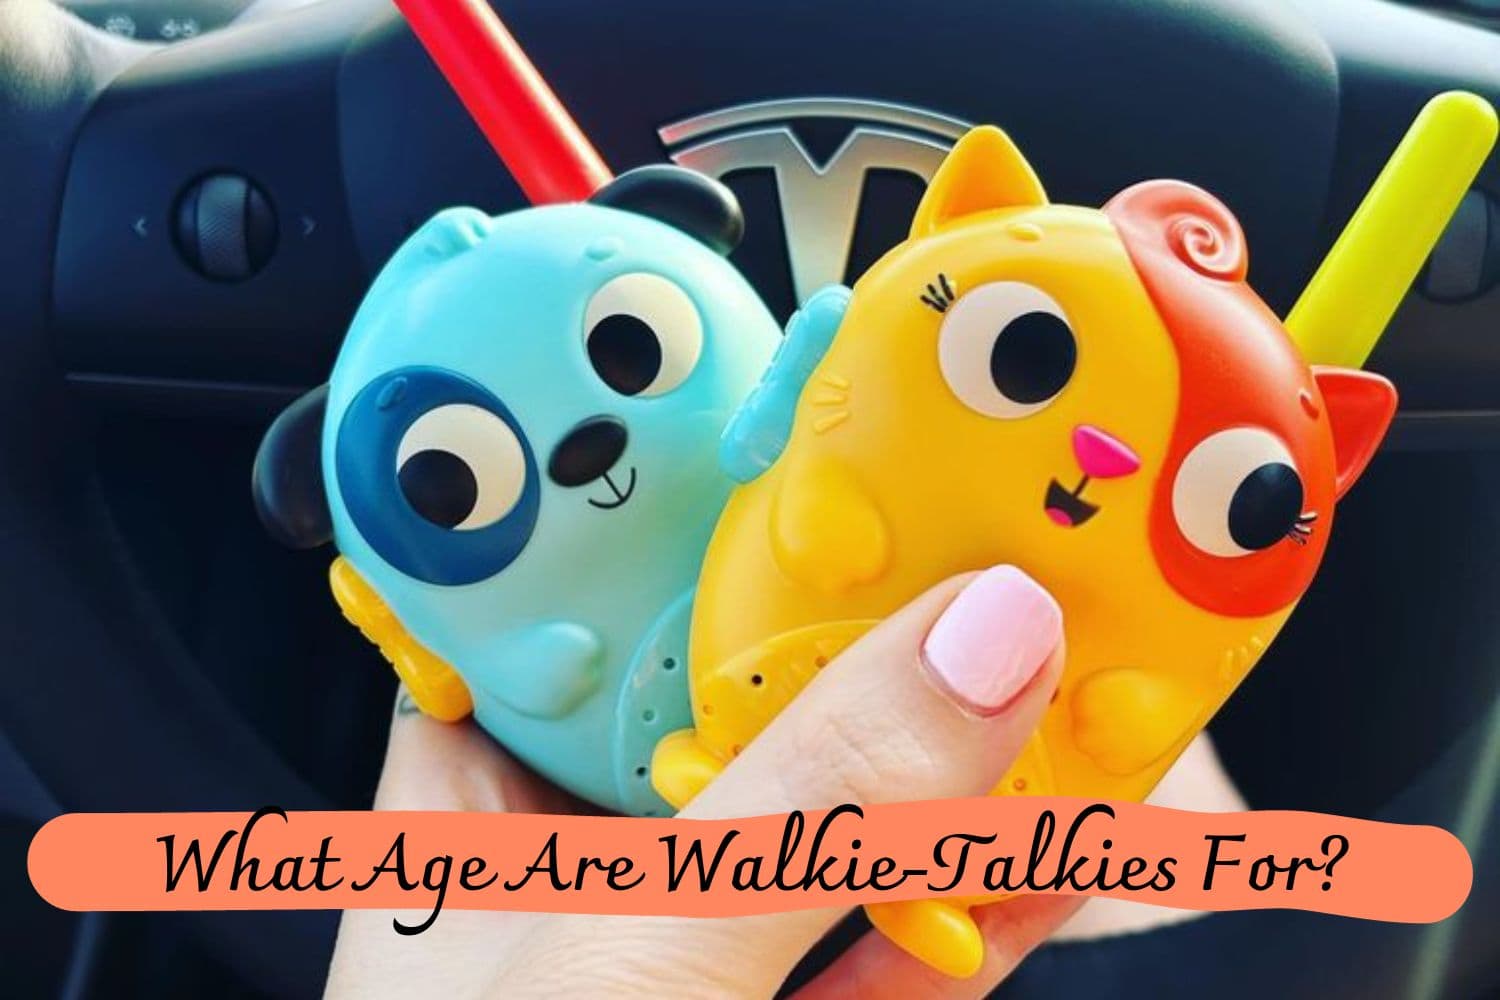 What Age Are Walkie-Talkies For